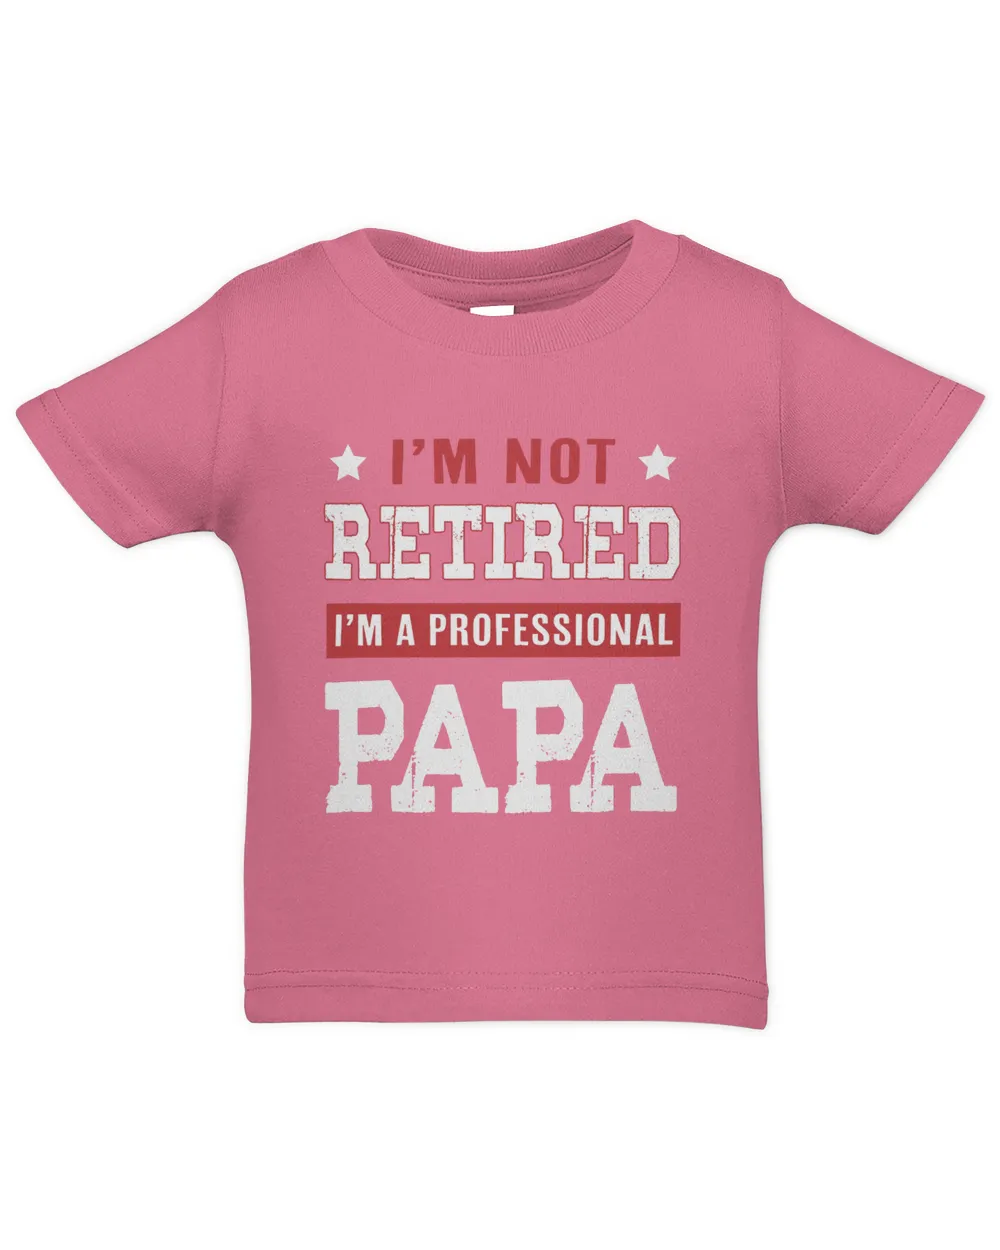 I'm not retired I'm a professional papa